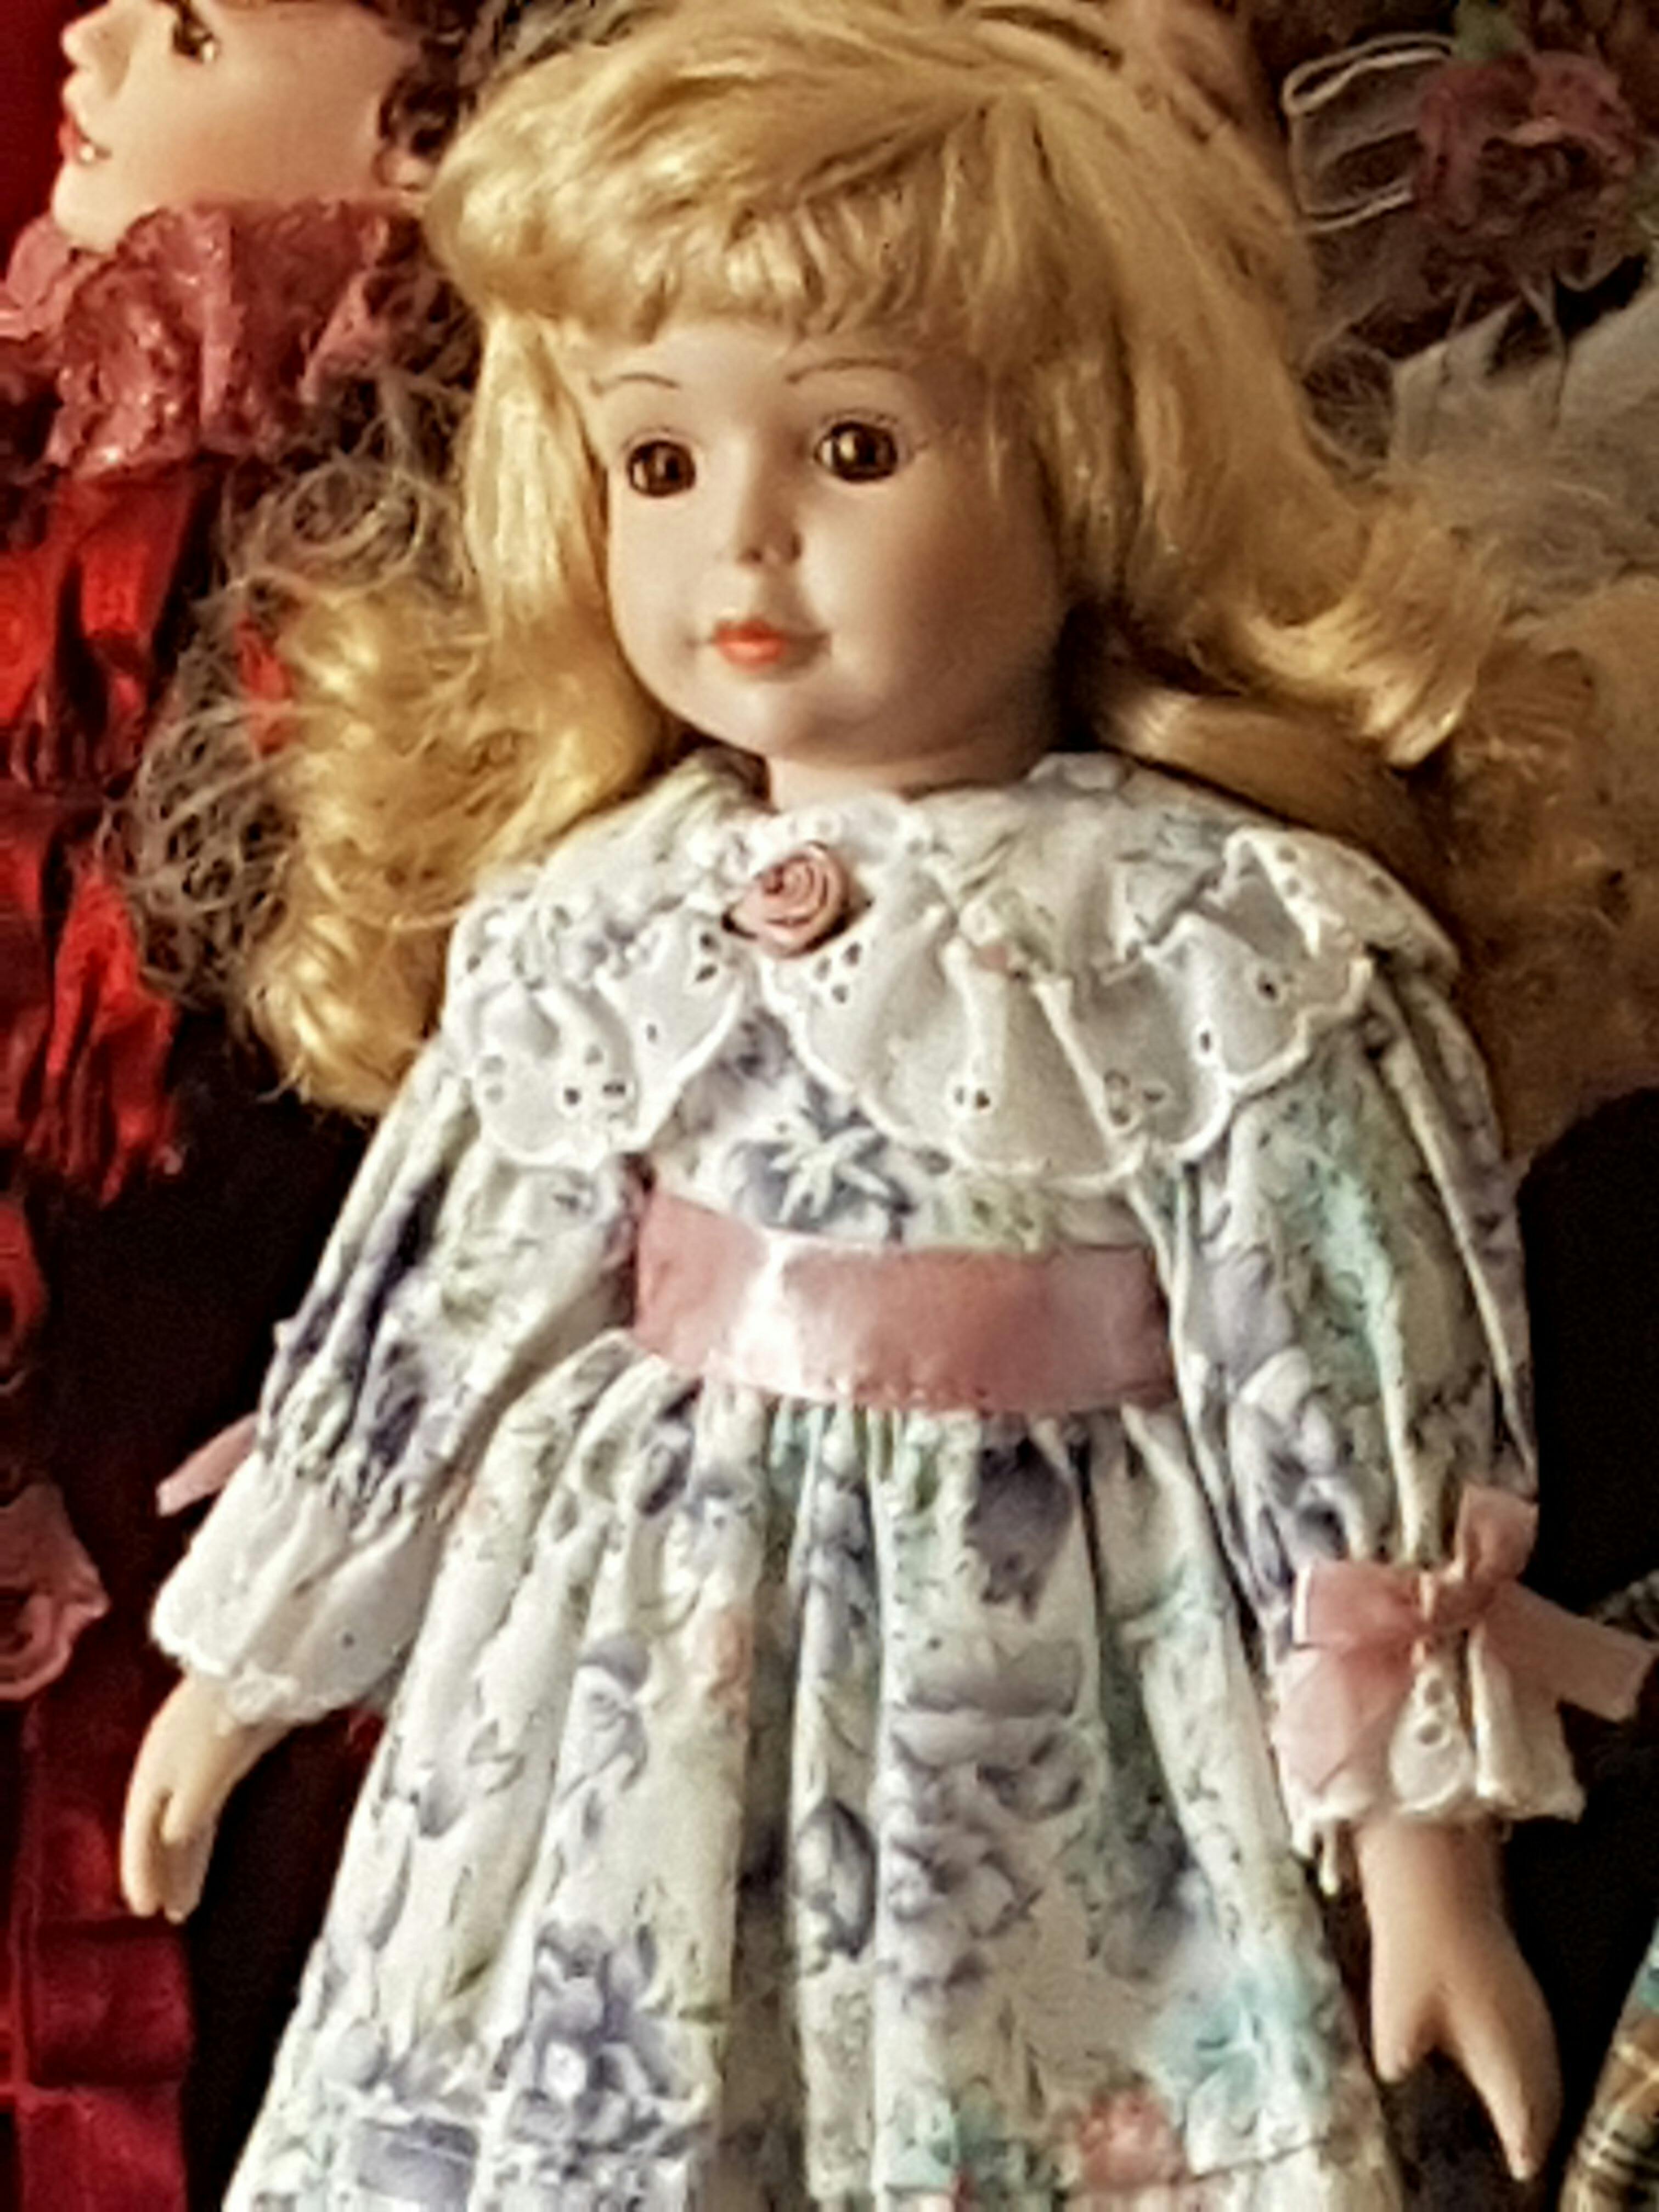 haunted dolls collecting creepy spooky